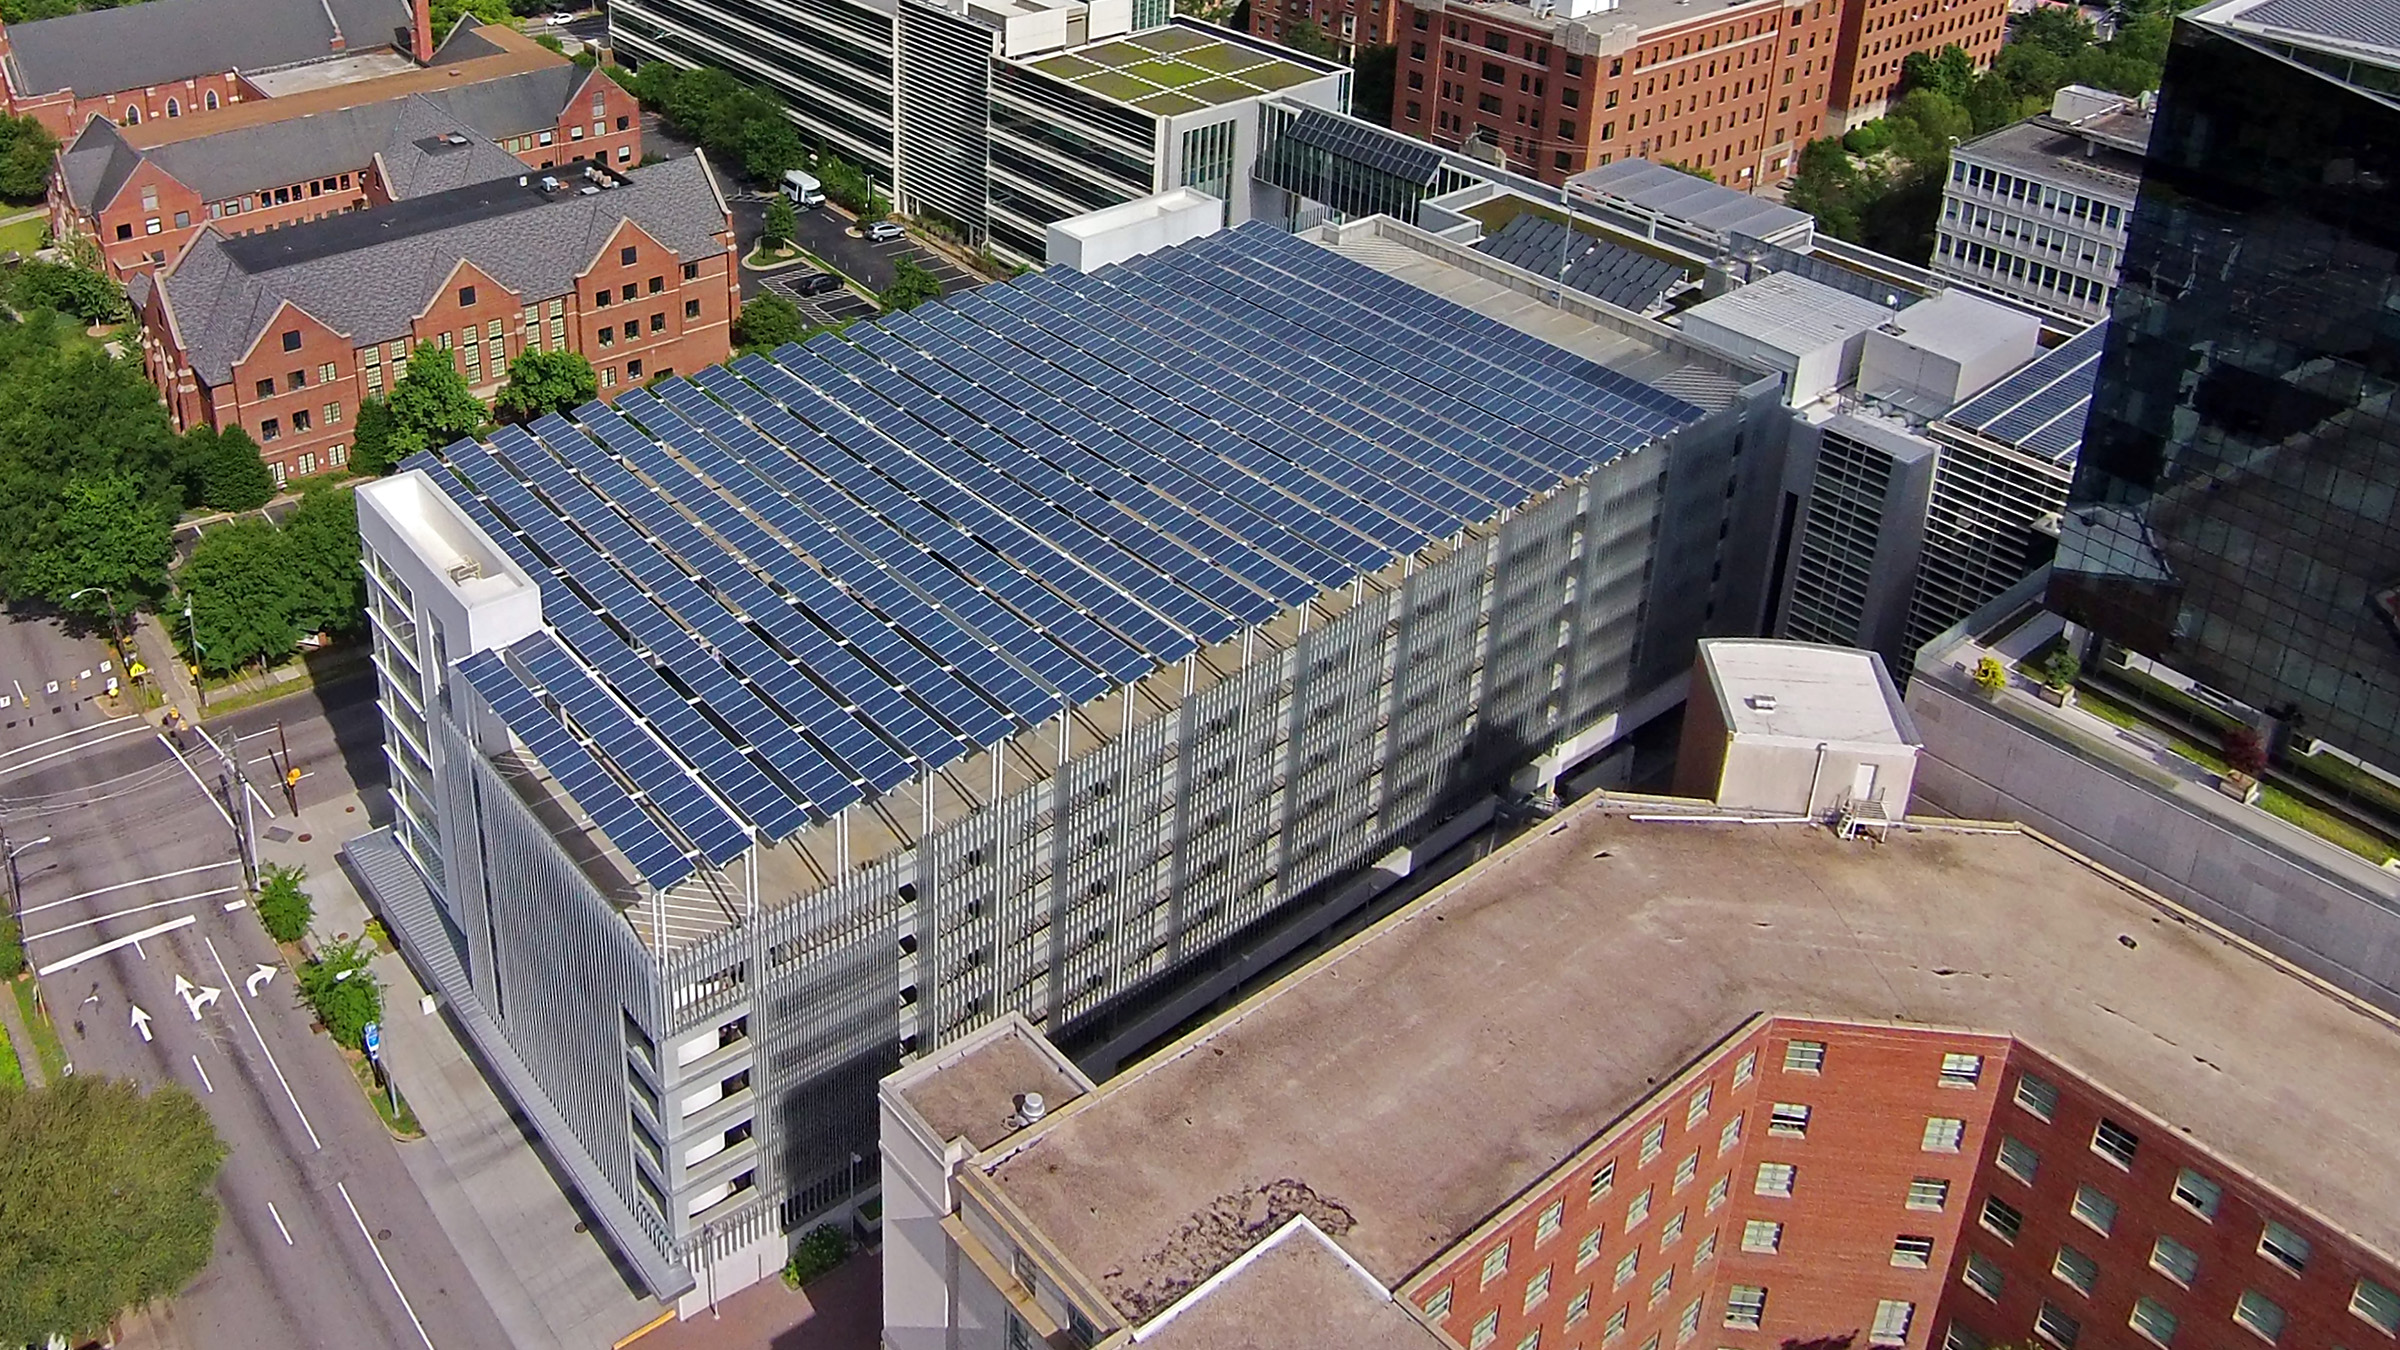 Green Square Parking Deck in Raleigh, NC features photovoltaic solar panels on the roof and a cistern for water reclamation